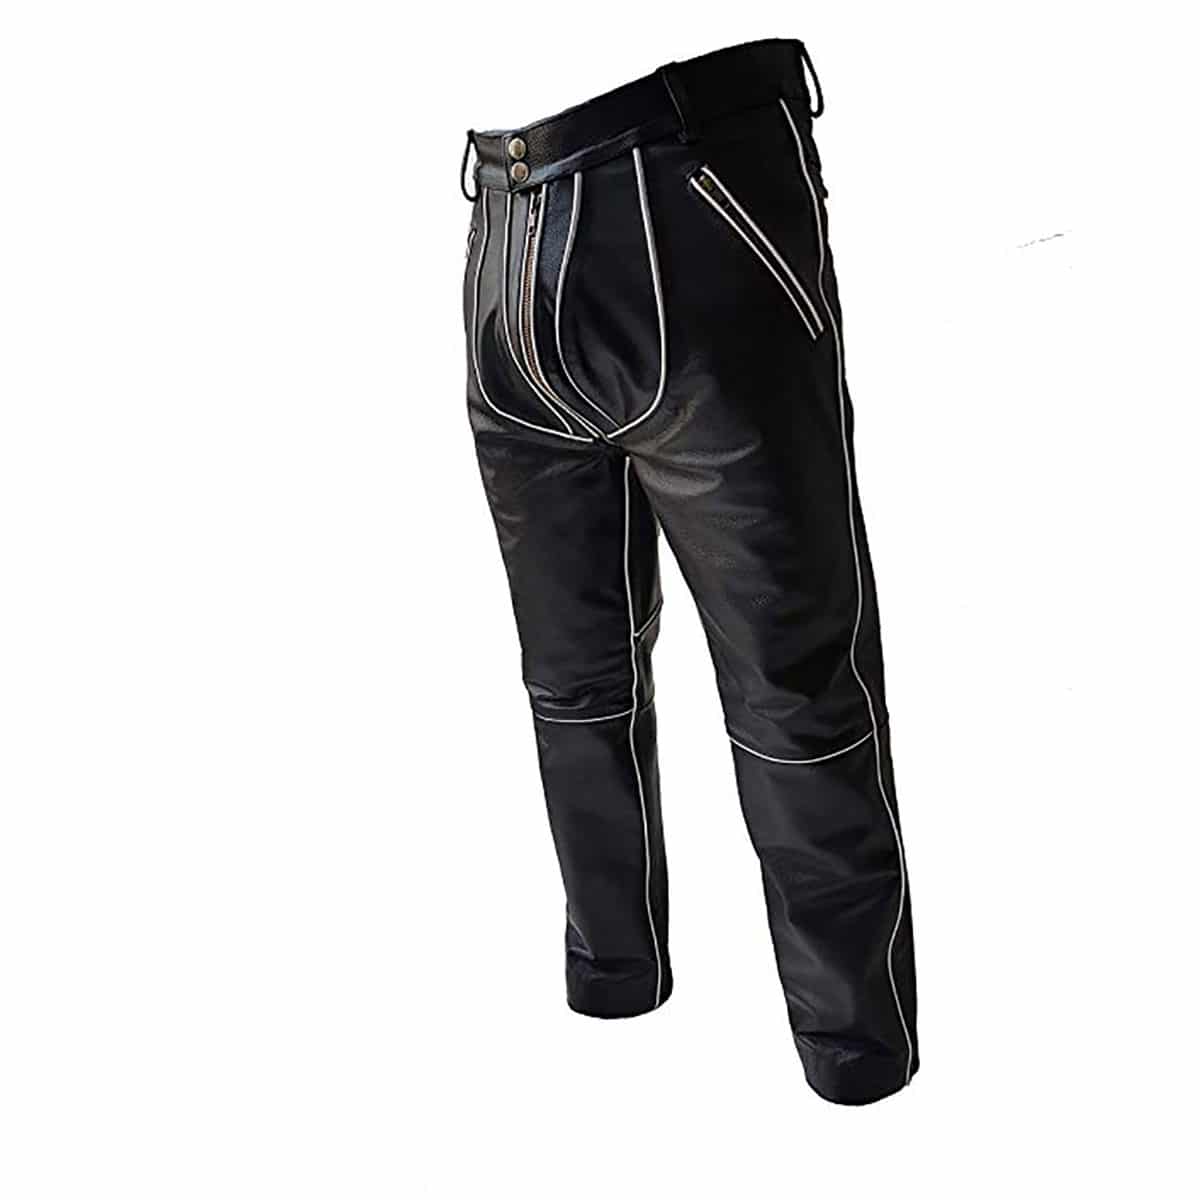 Men Black Leather Biker Style Jeans Pants Trousers with White Piping -J10